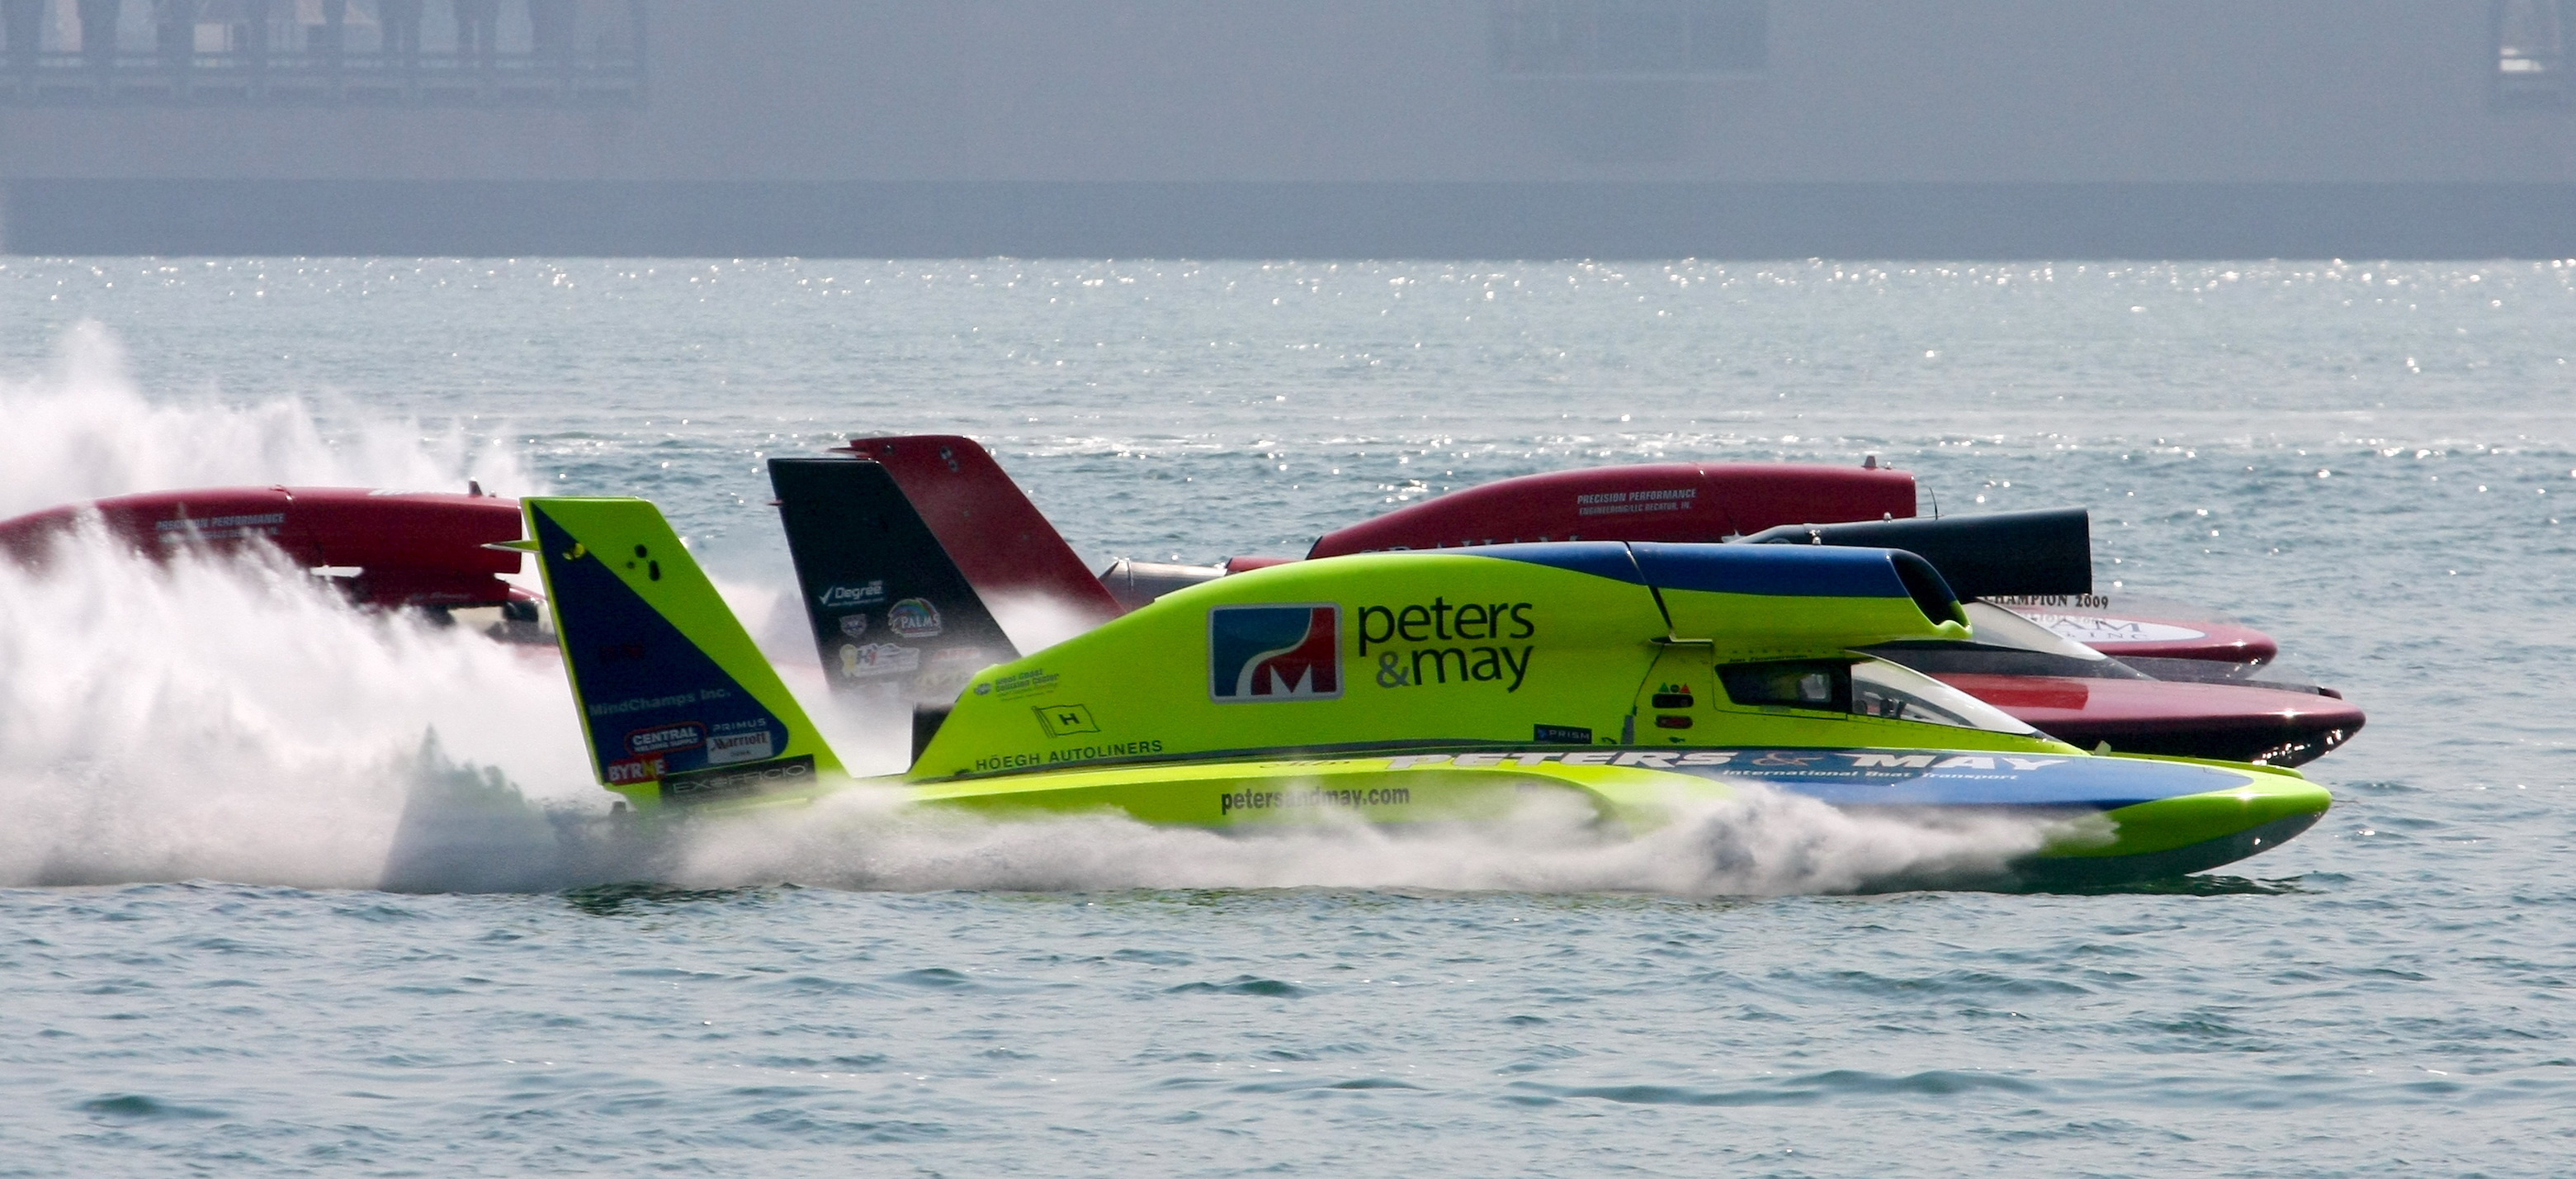 Hydroplane: Water racing, Jet boat, Flat-bottomed hull with an upward curve at the bow. 3130x1430 Dual Screen Background.